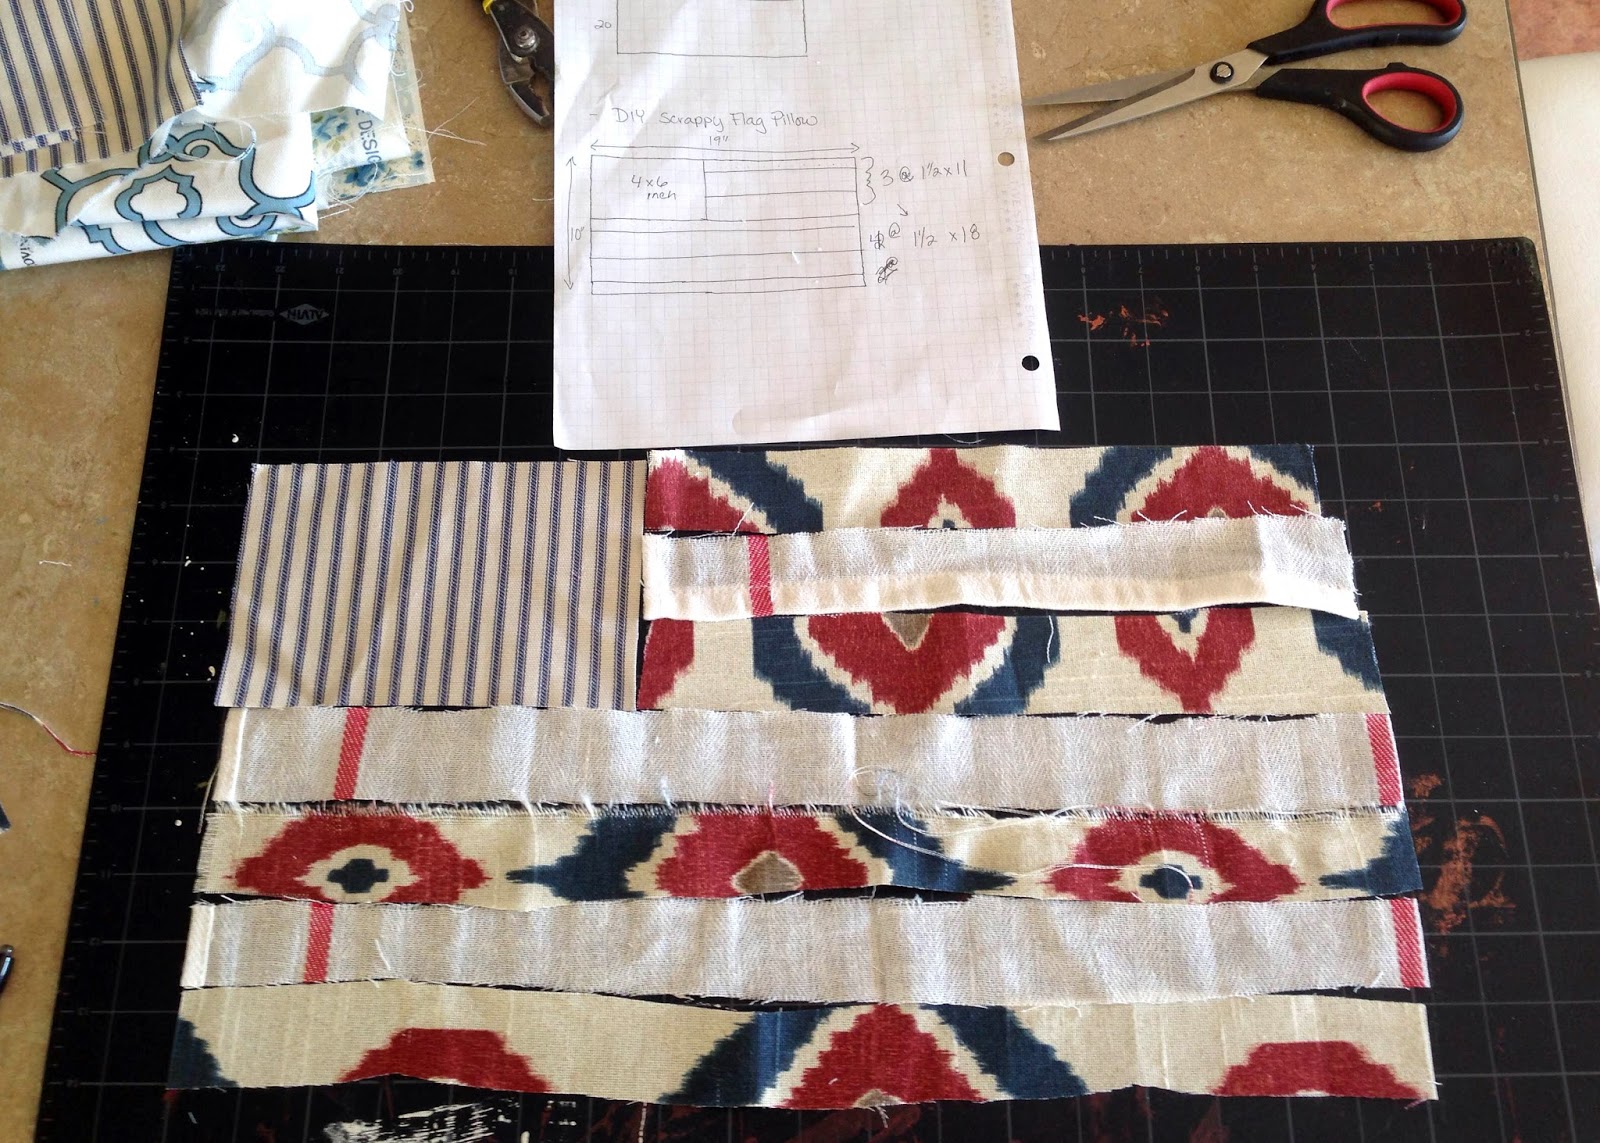 Step by Step instructions to make your own Scrappy Flag Pillow